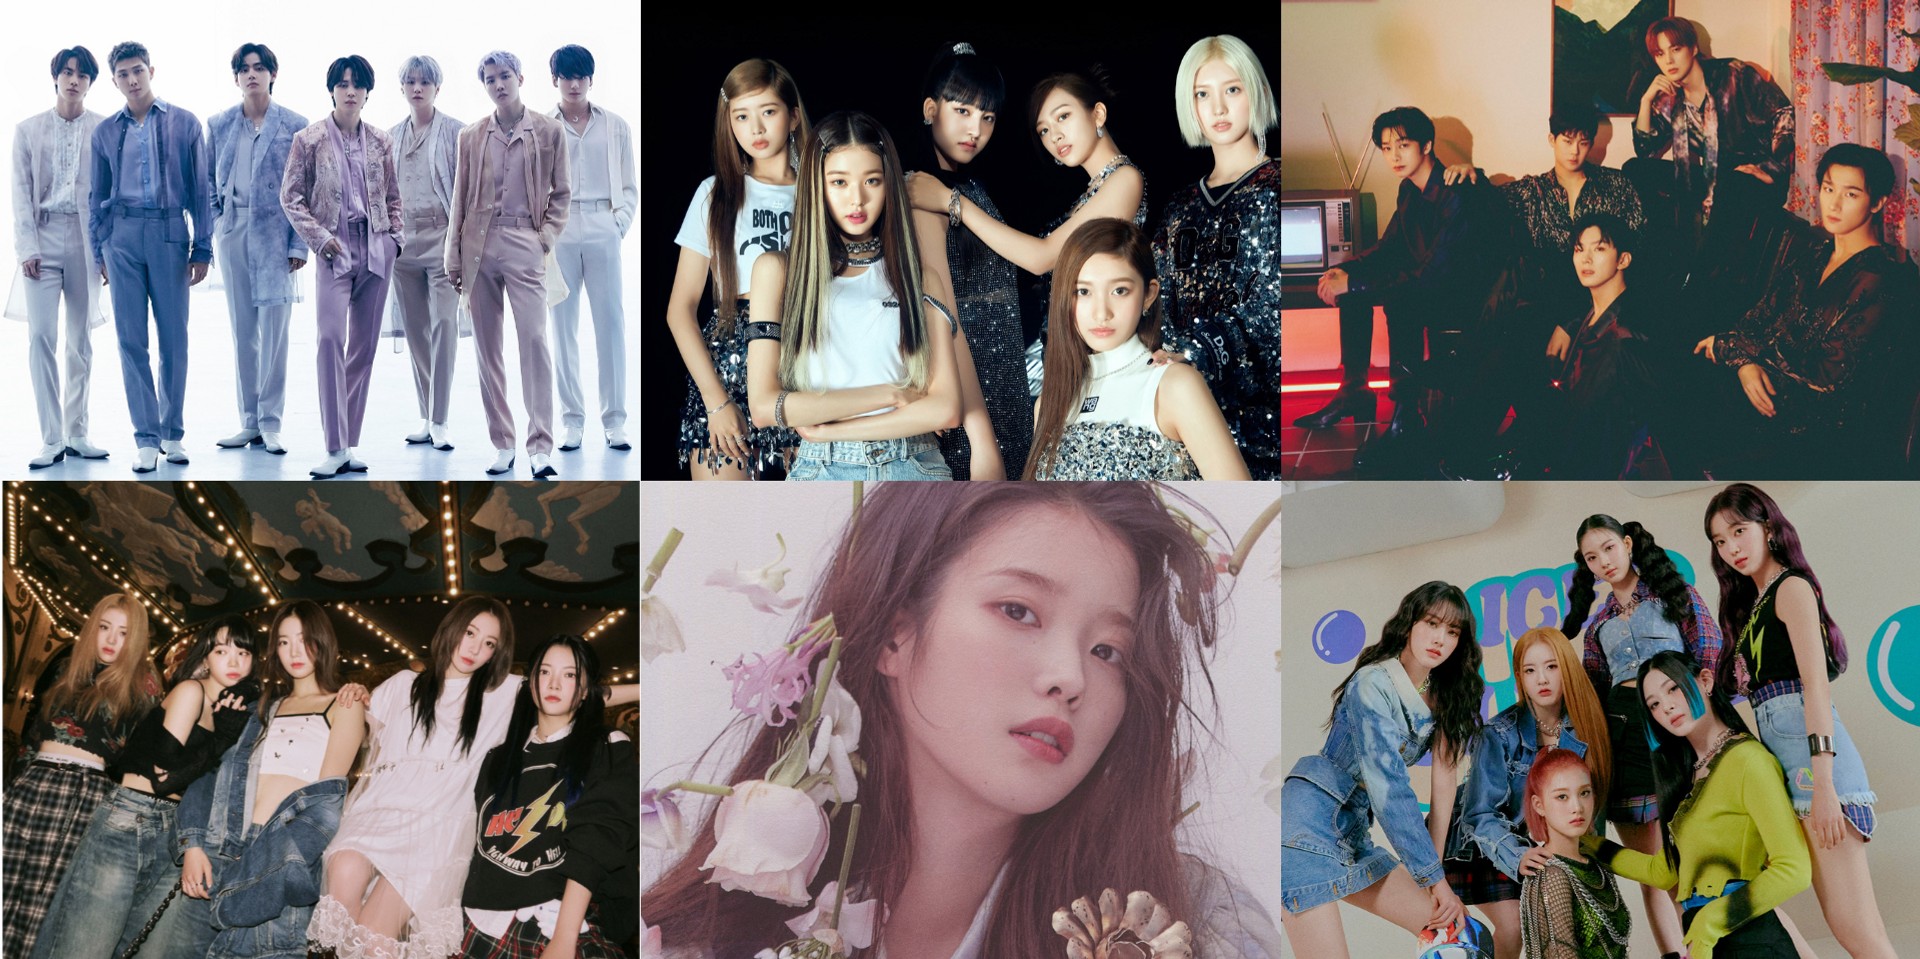 Here are the winners of the 2022 Melon Music Awards – BTS, IVE, STAYC, IU, LE SSERAFIM, MONSTA X, and more